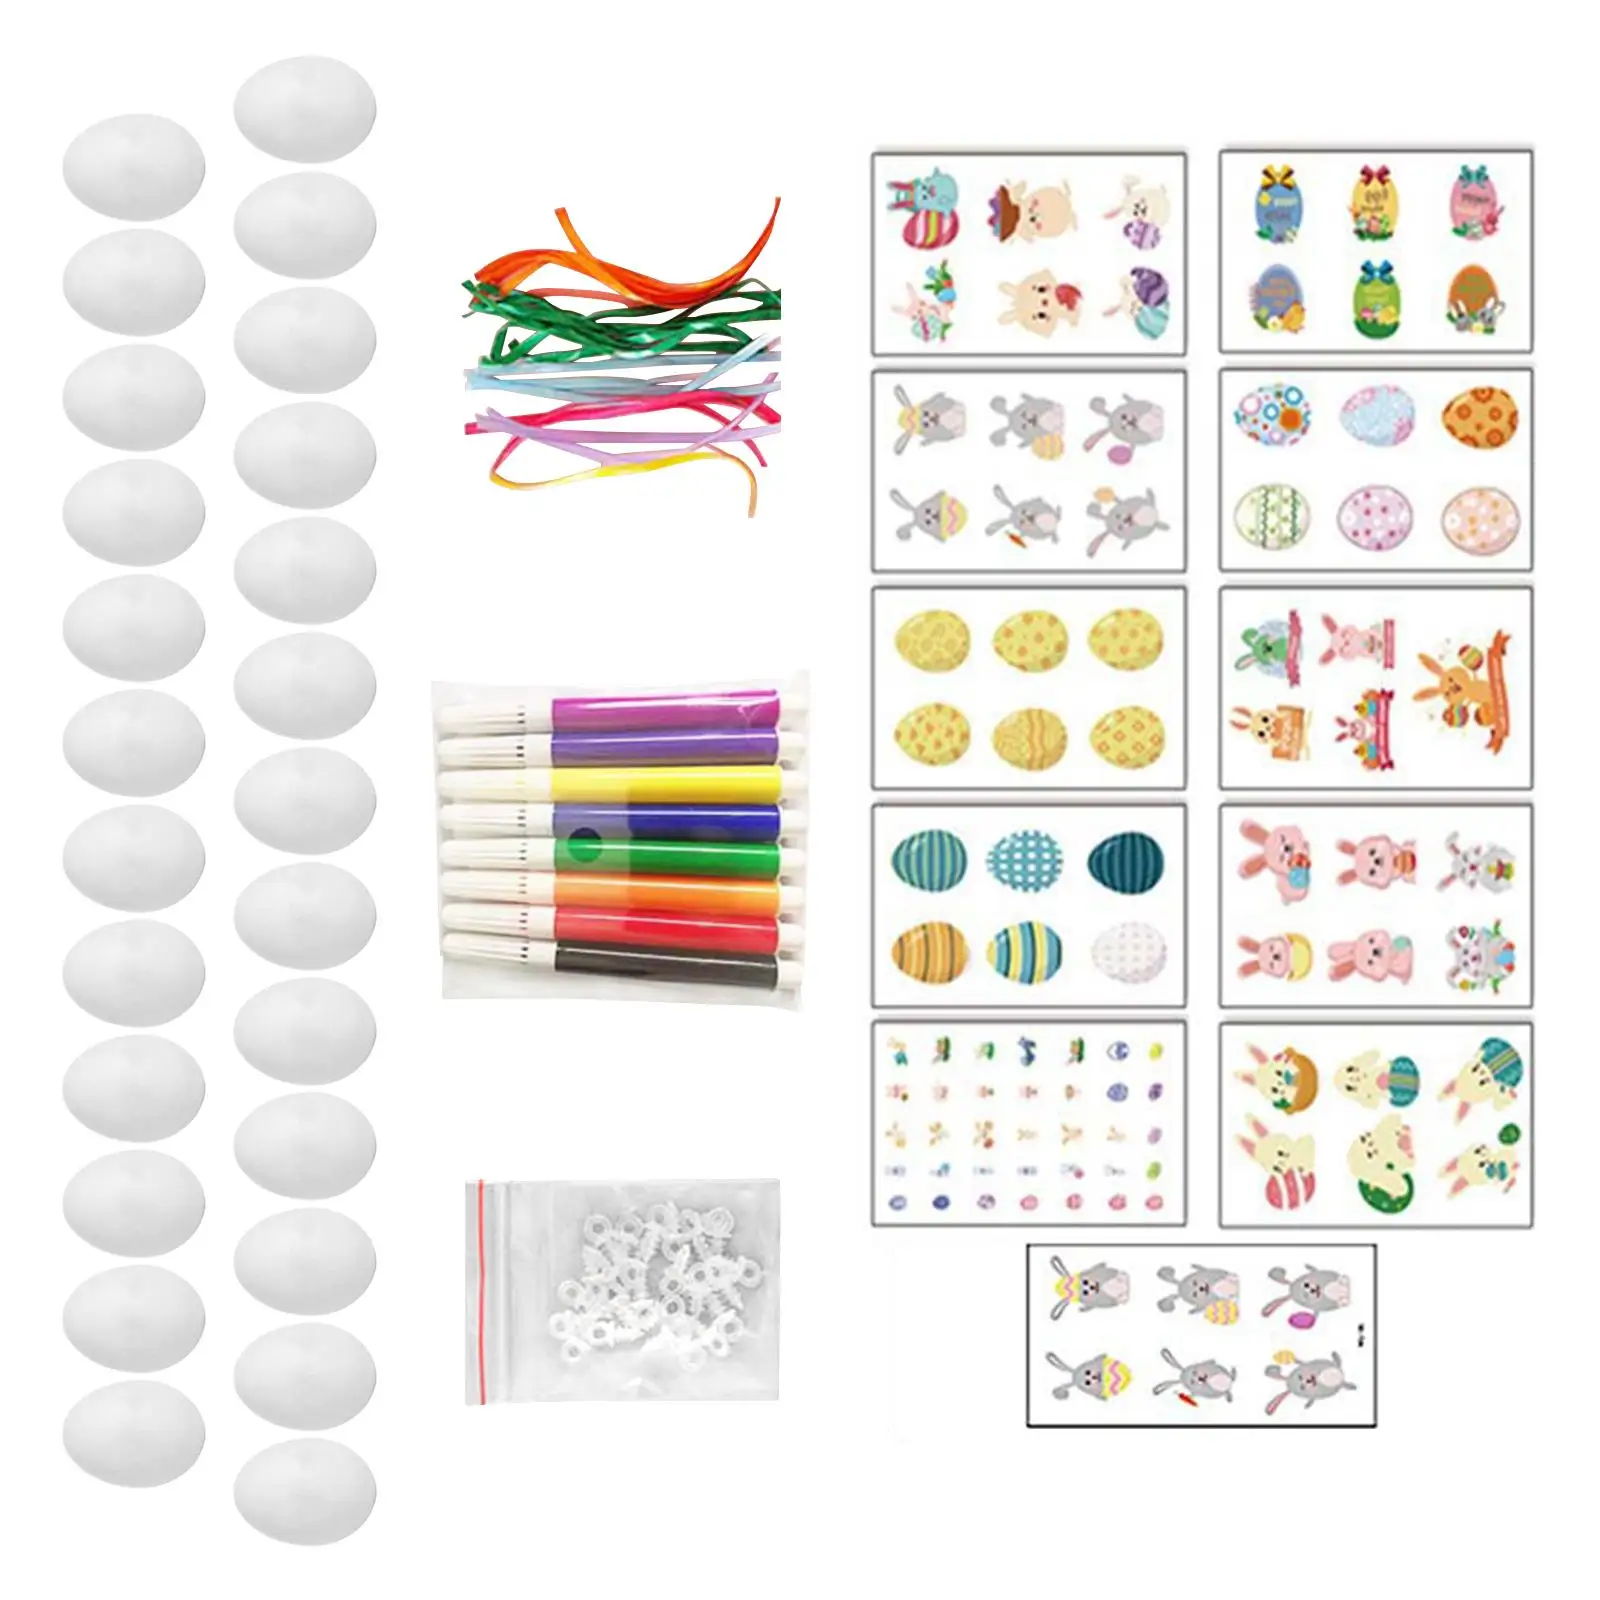 White Blank Easter Eggs Craft Kit with Ribbon Ornaments Painting Craft Set